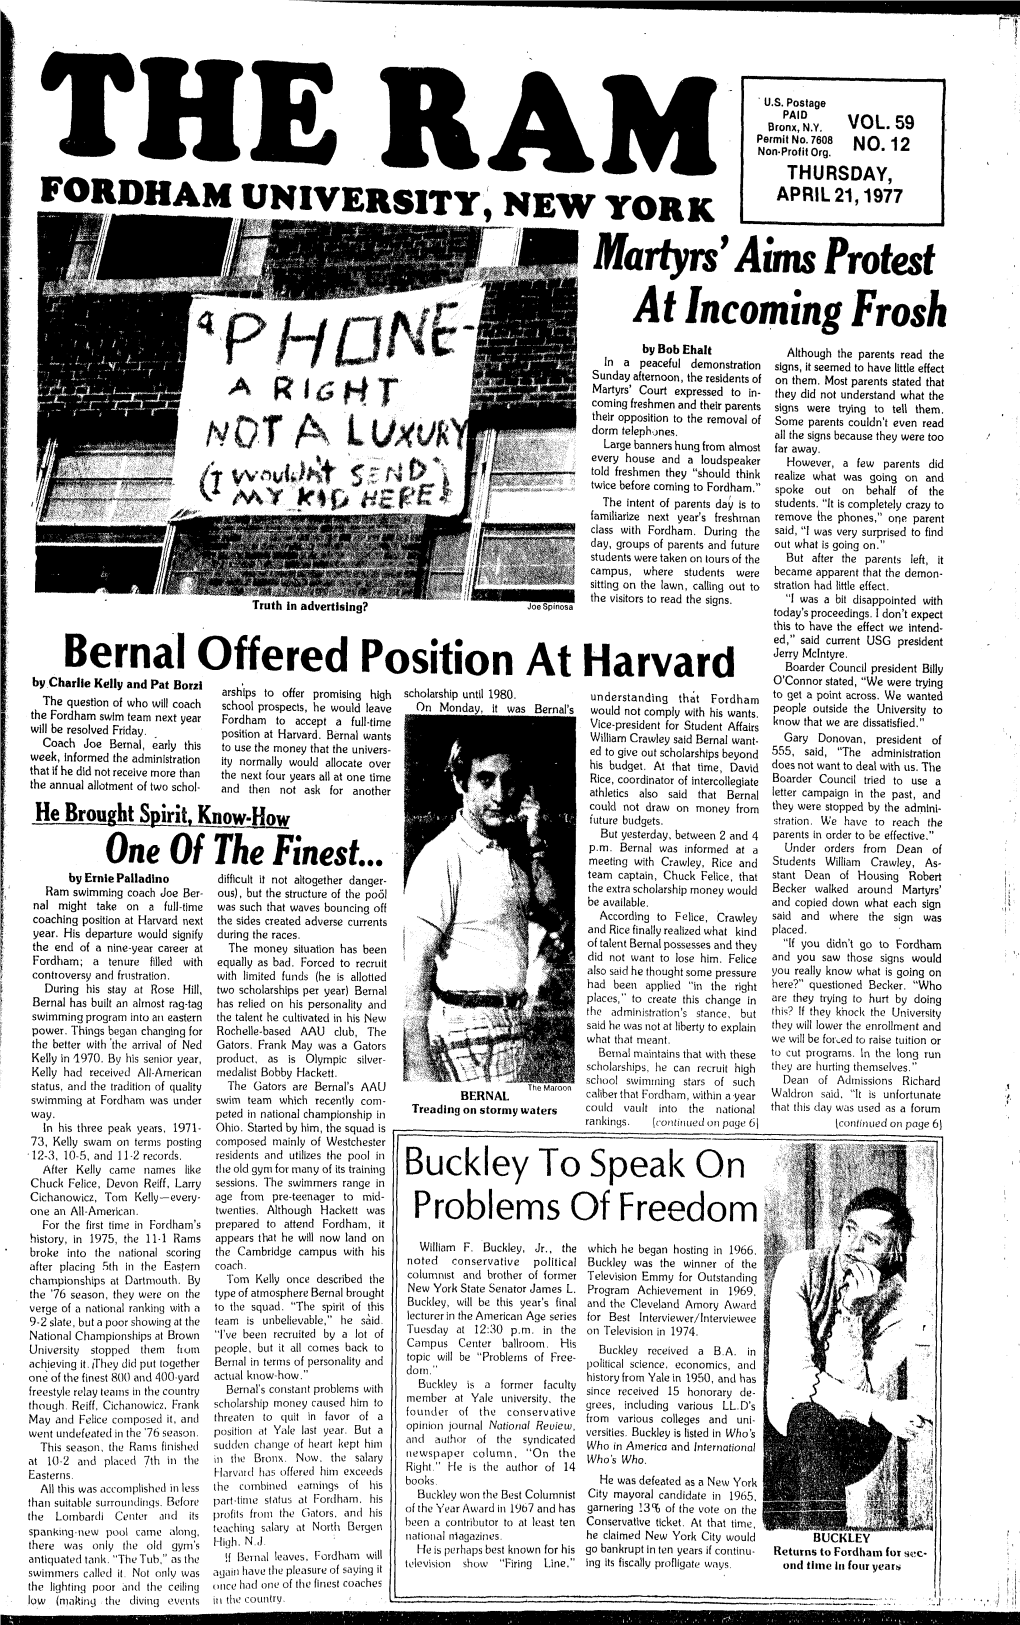 Martyrs9aims Protest at Incoming Frosh Bernal Offered Position At